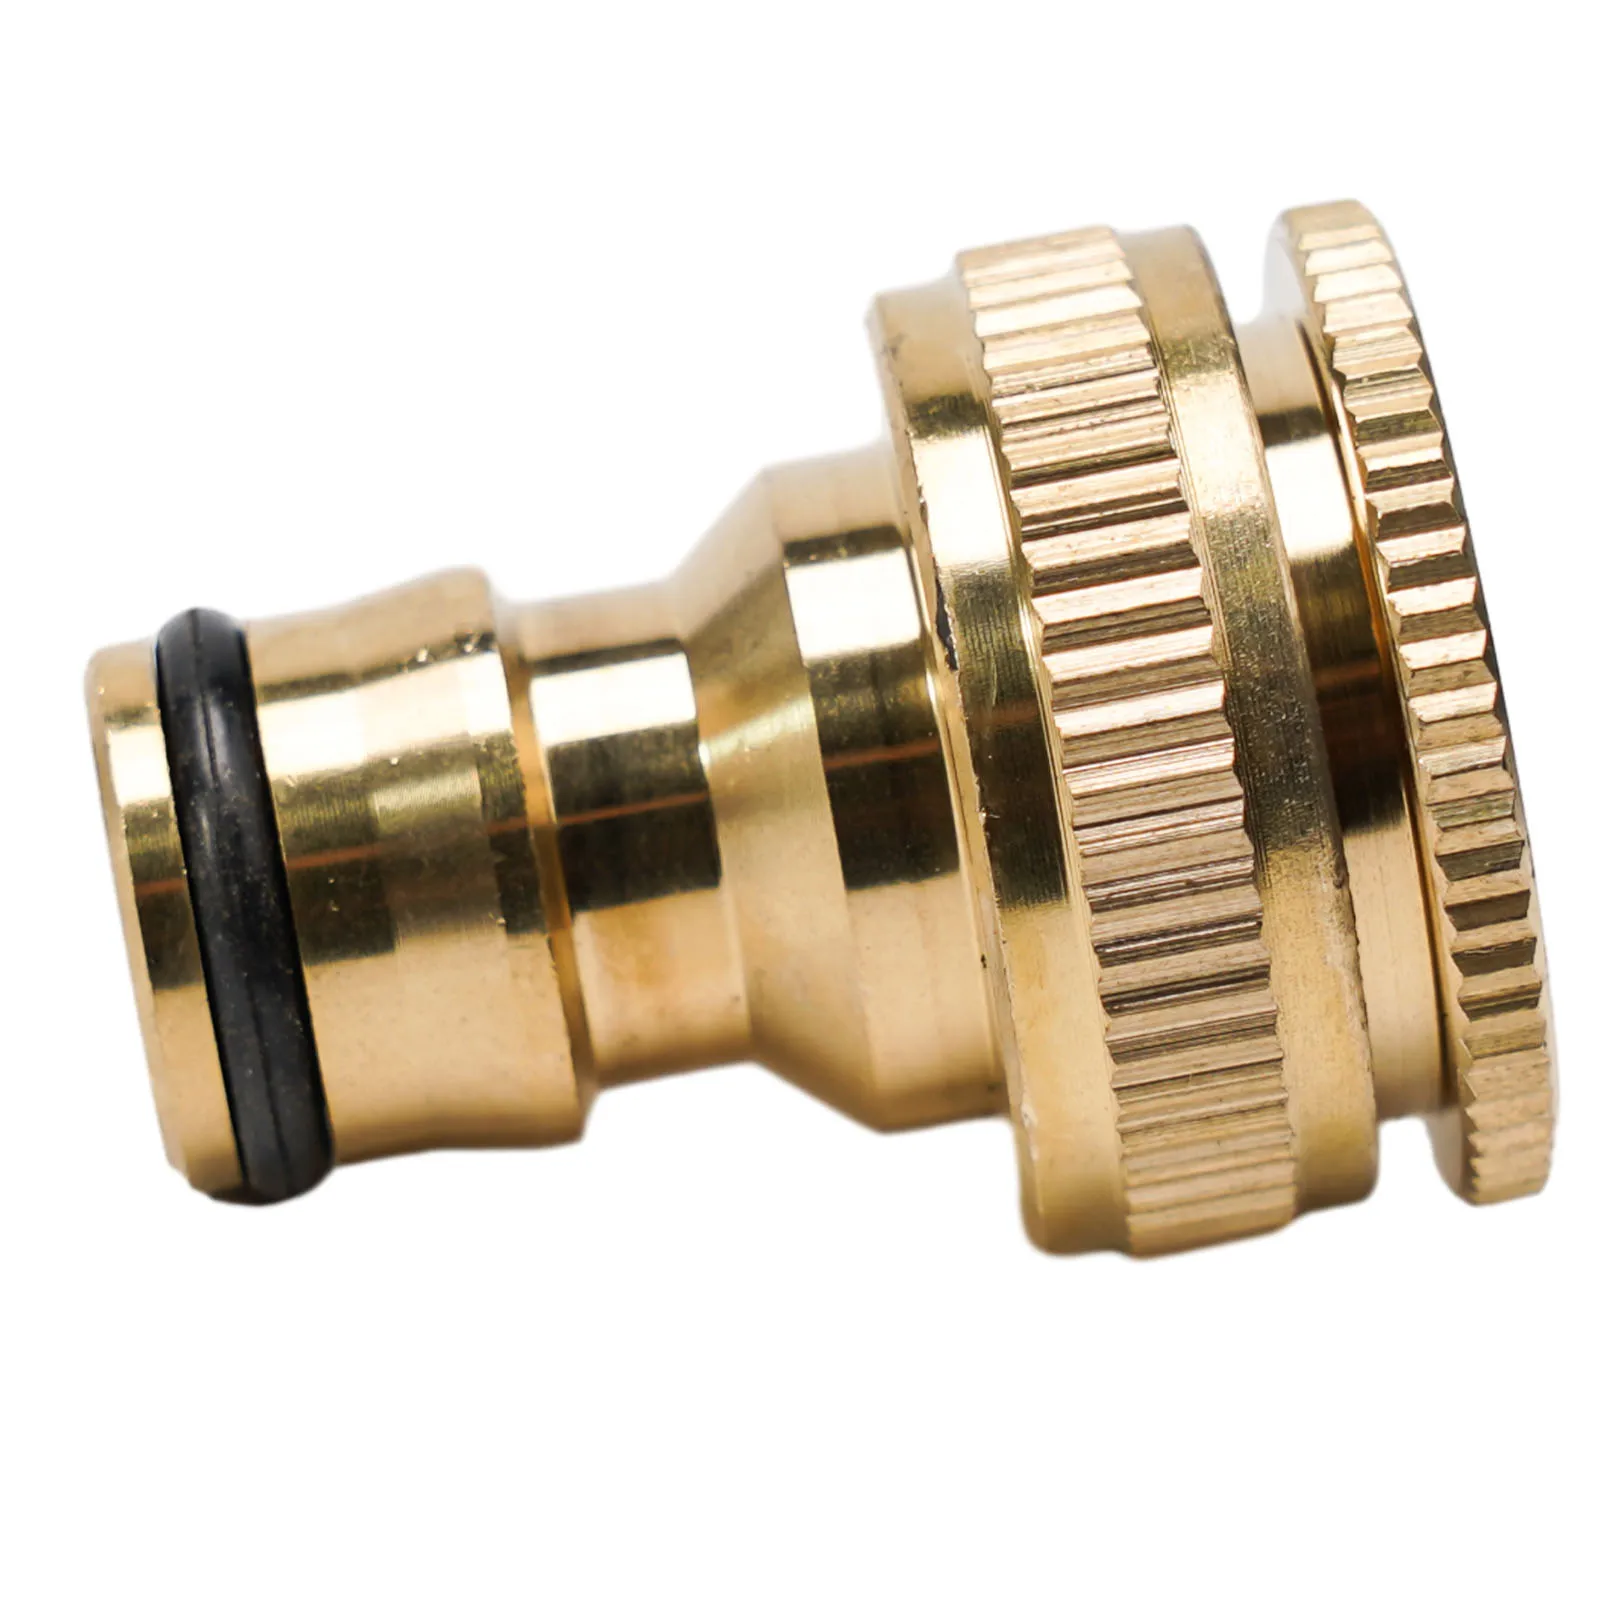 

Pressure Washer Hose Adaptor Brass Hose Tap Connector 3/4'' 1/2'' THREADED GARDEN WATER PIPE ADAPTER FITTING Watering Equipment